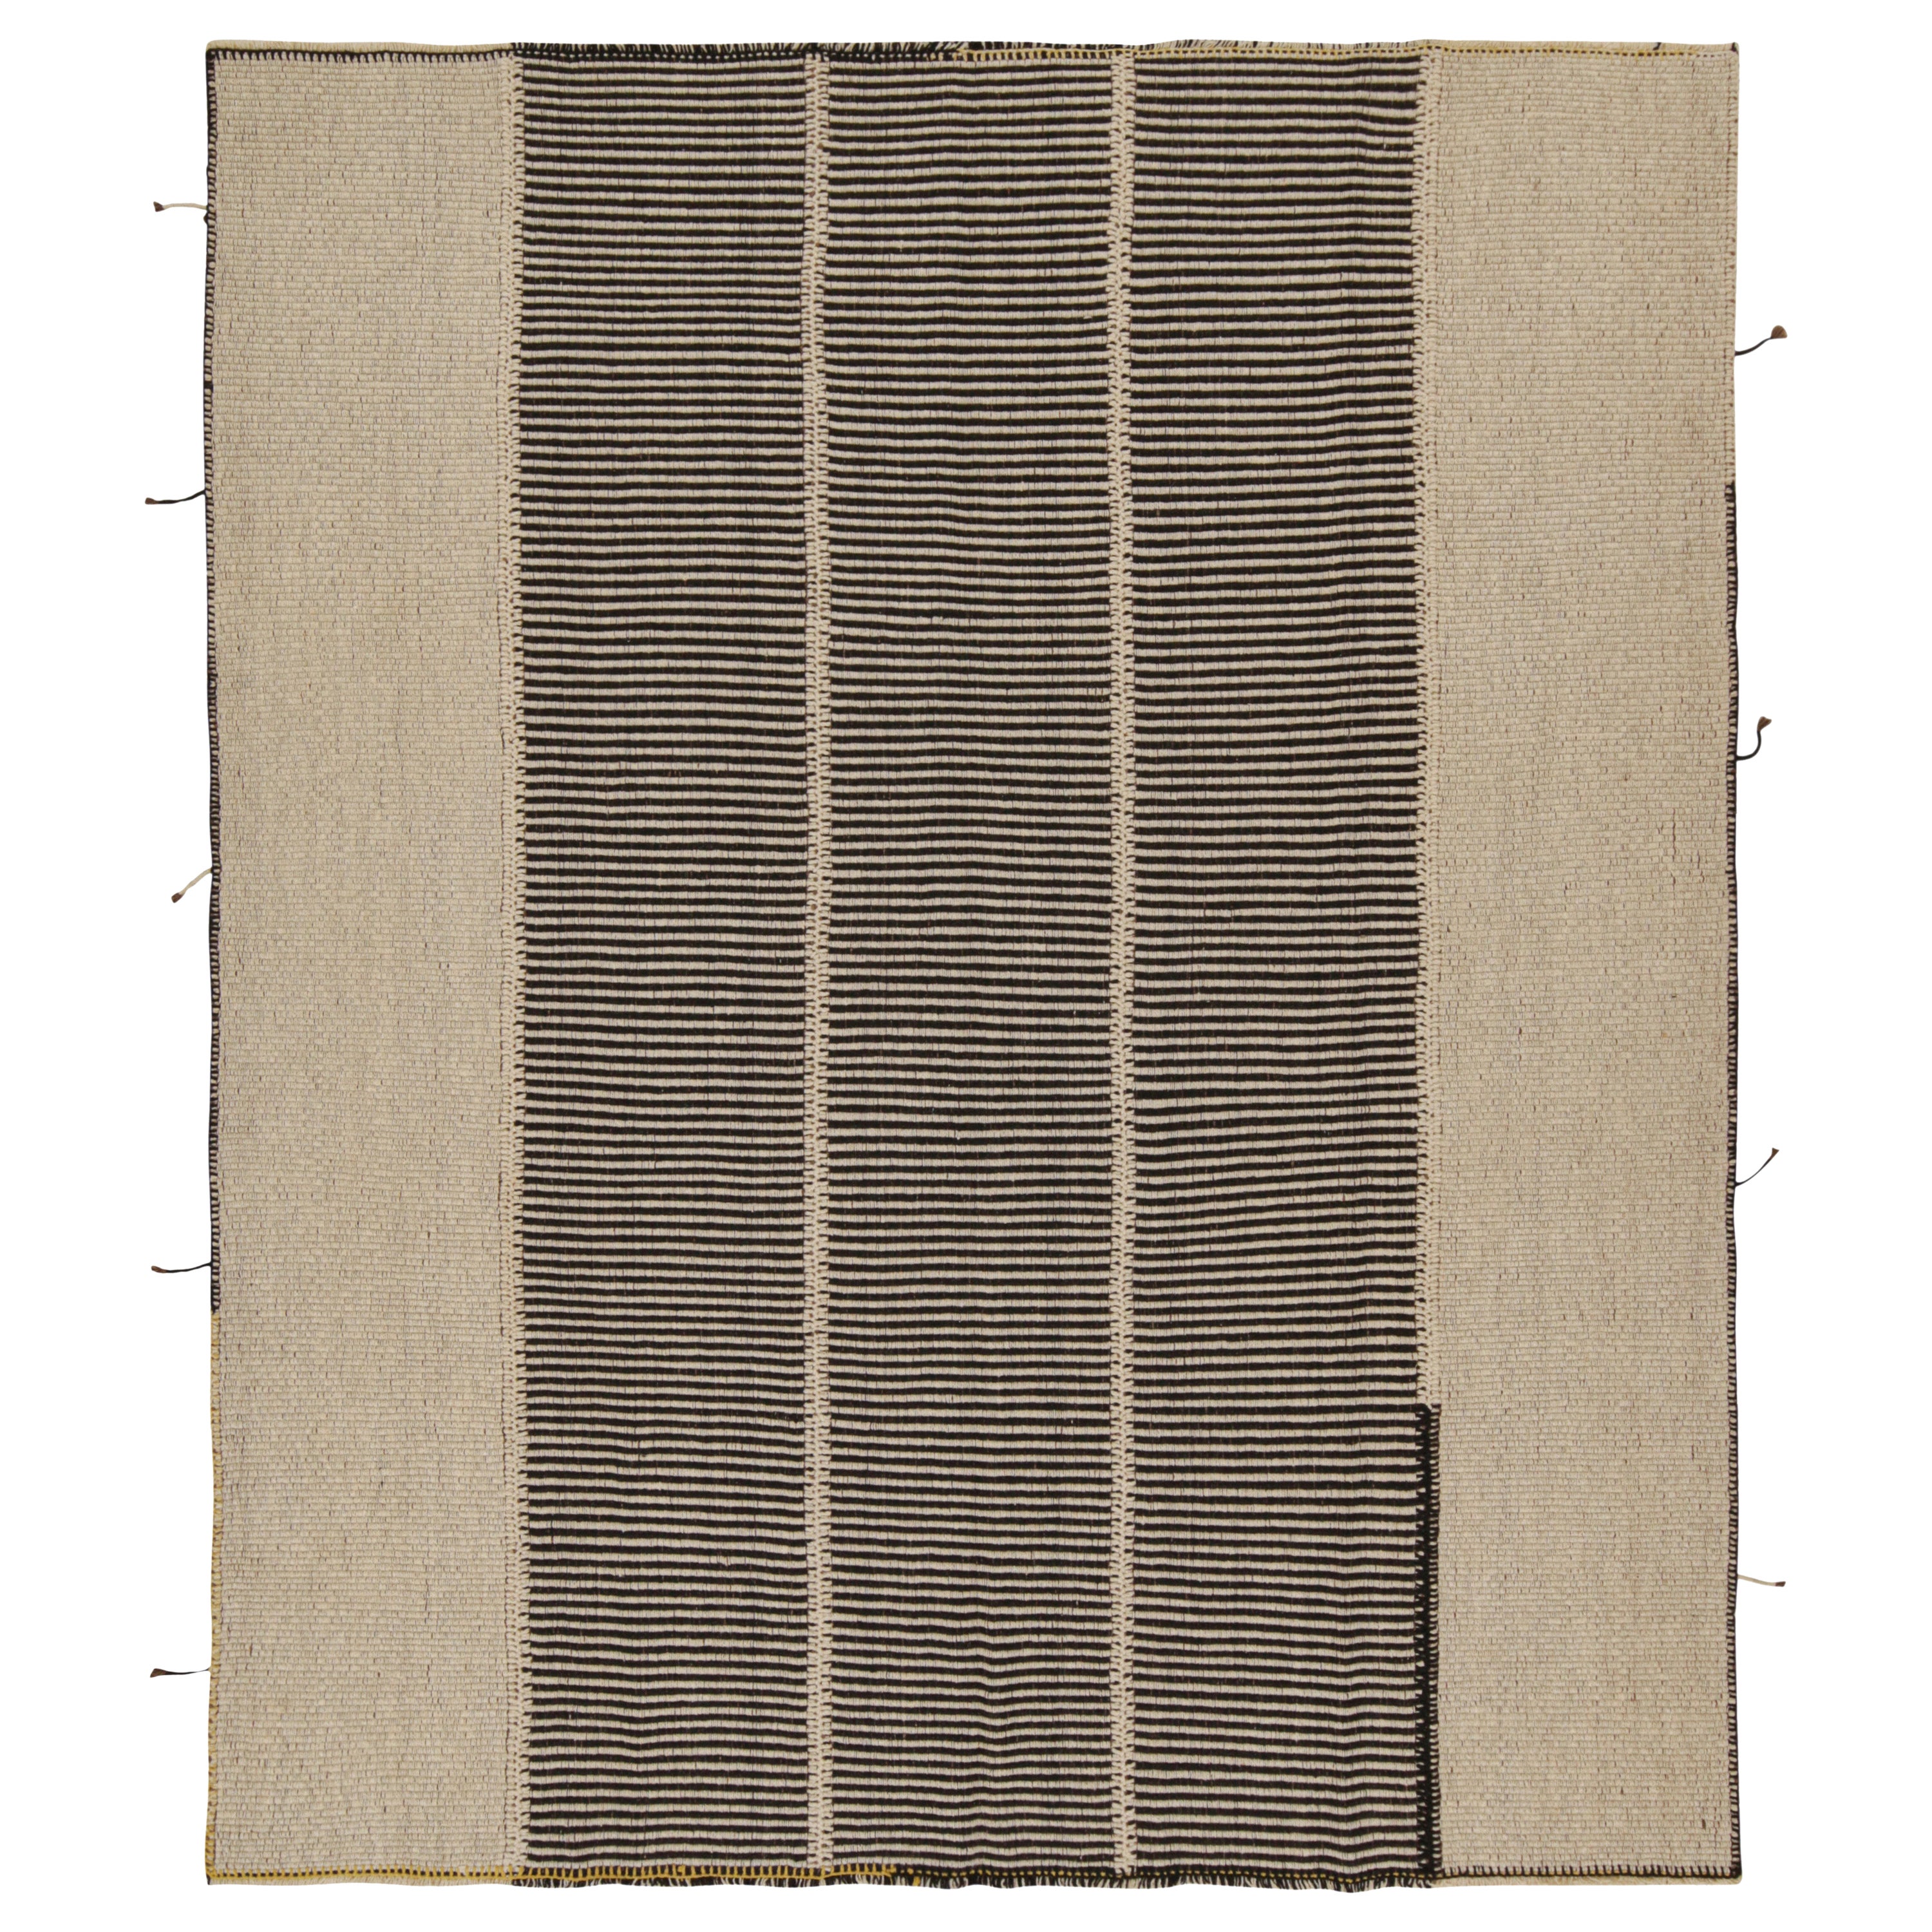 Rug & Kilim’s Contemporary Kilim in Black & Beige Stripes with Brown Accents